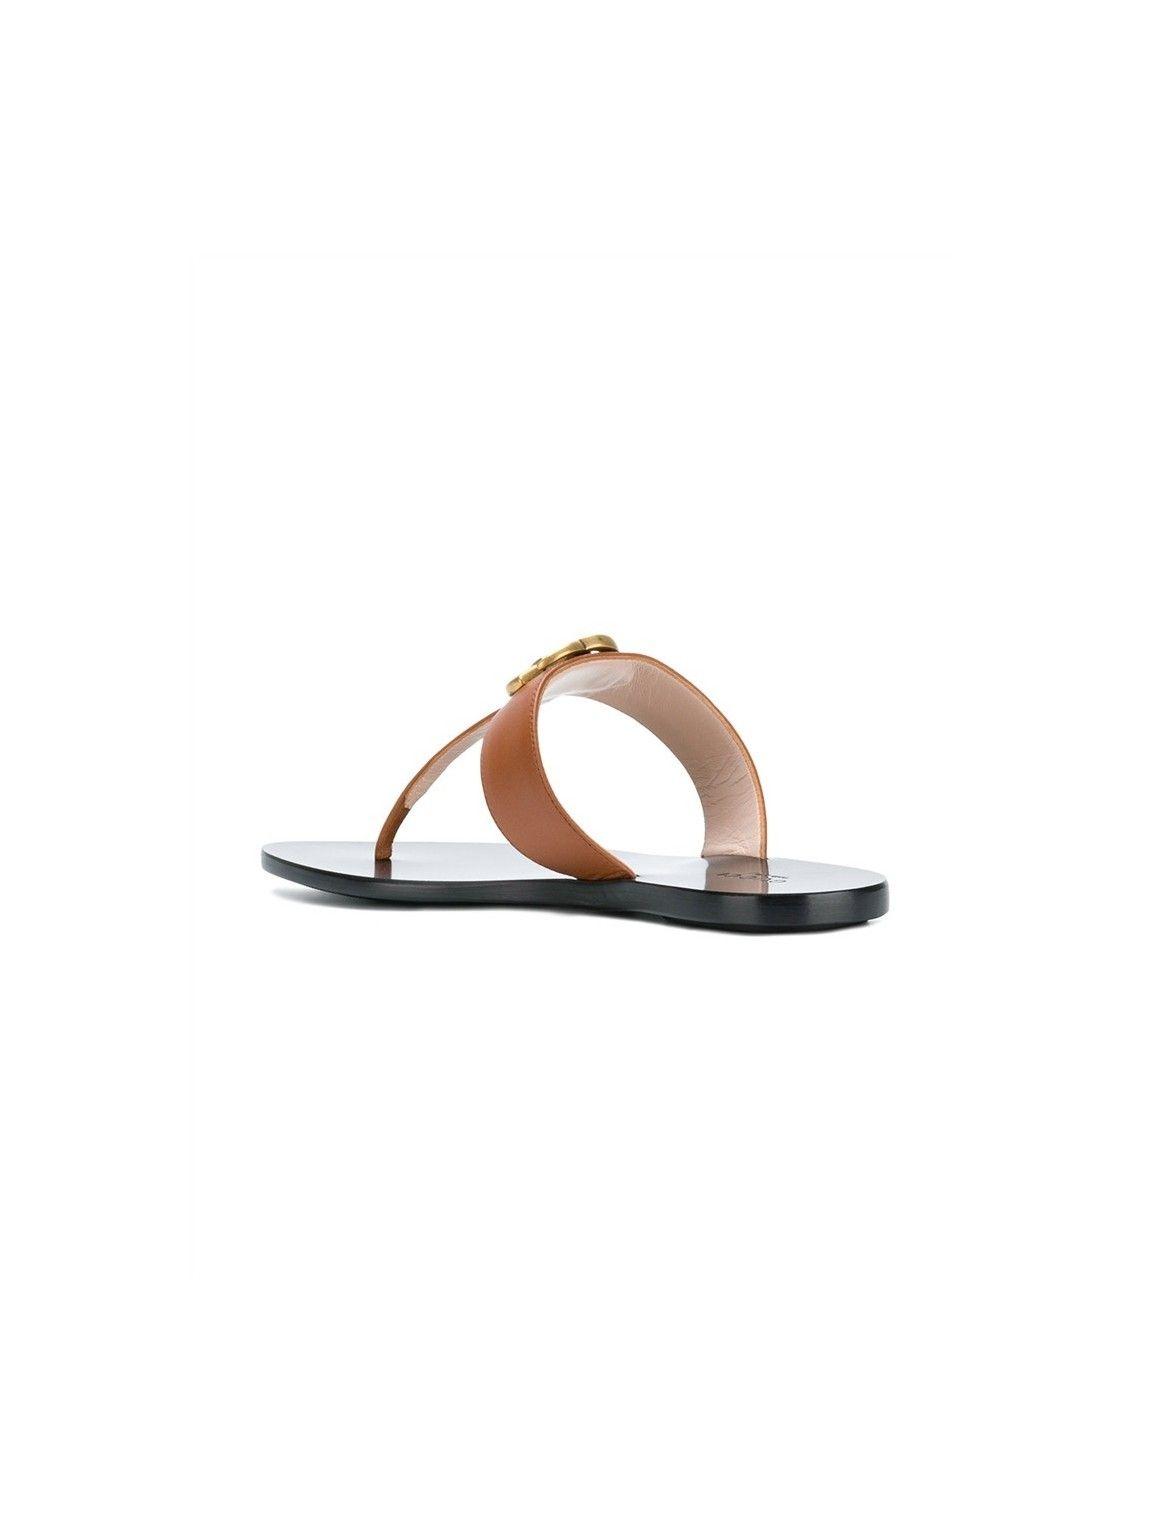 Double G Logo - Leather sandals with Double G logo Gucci WOMAN | myCOMPANERO.com